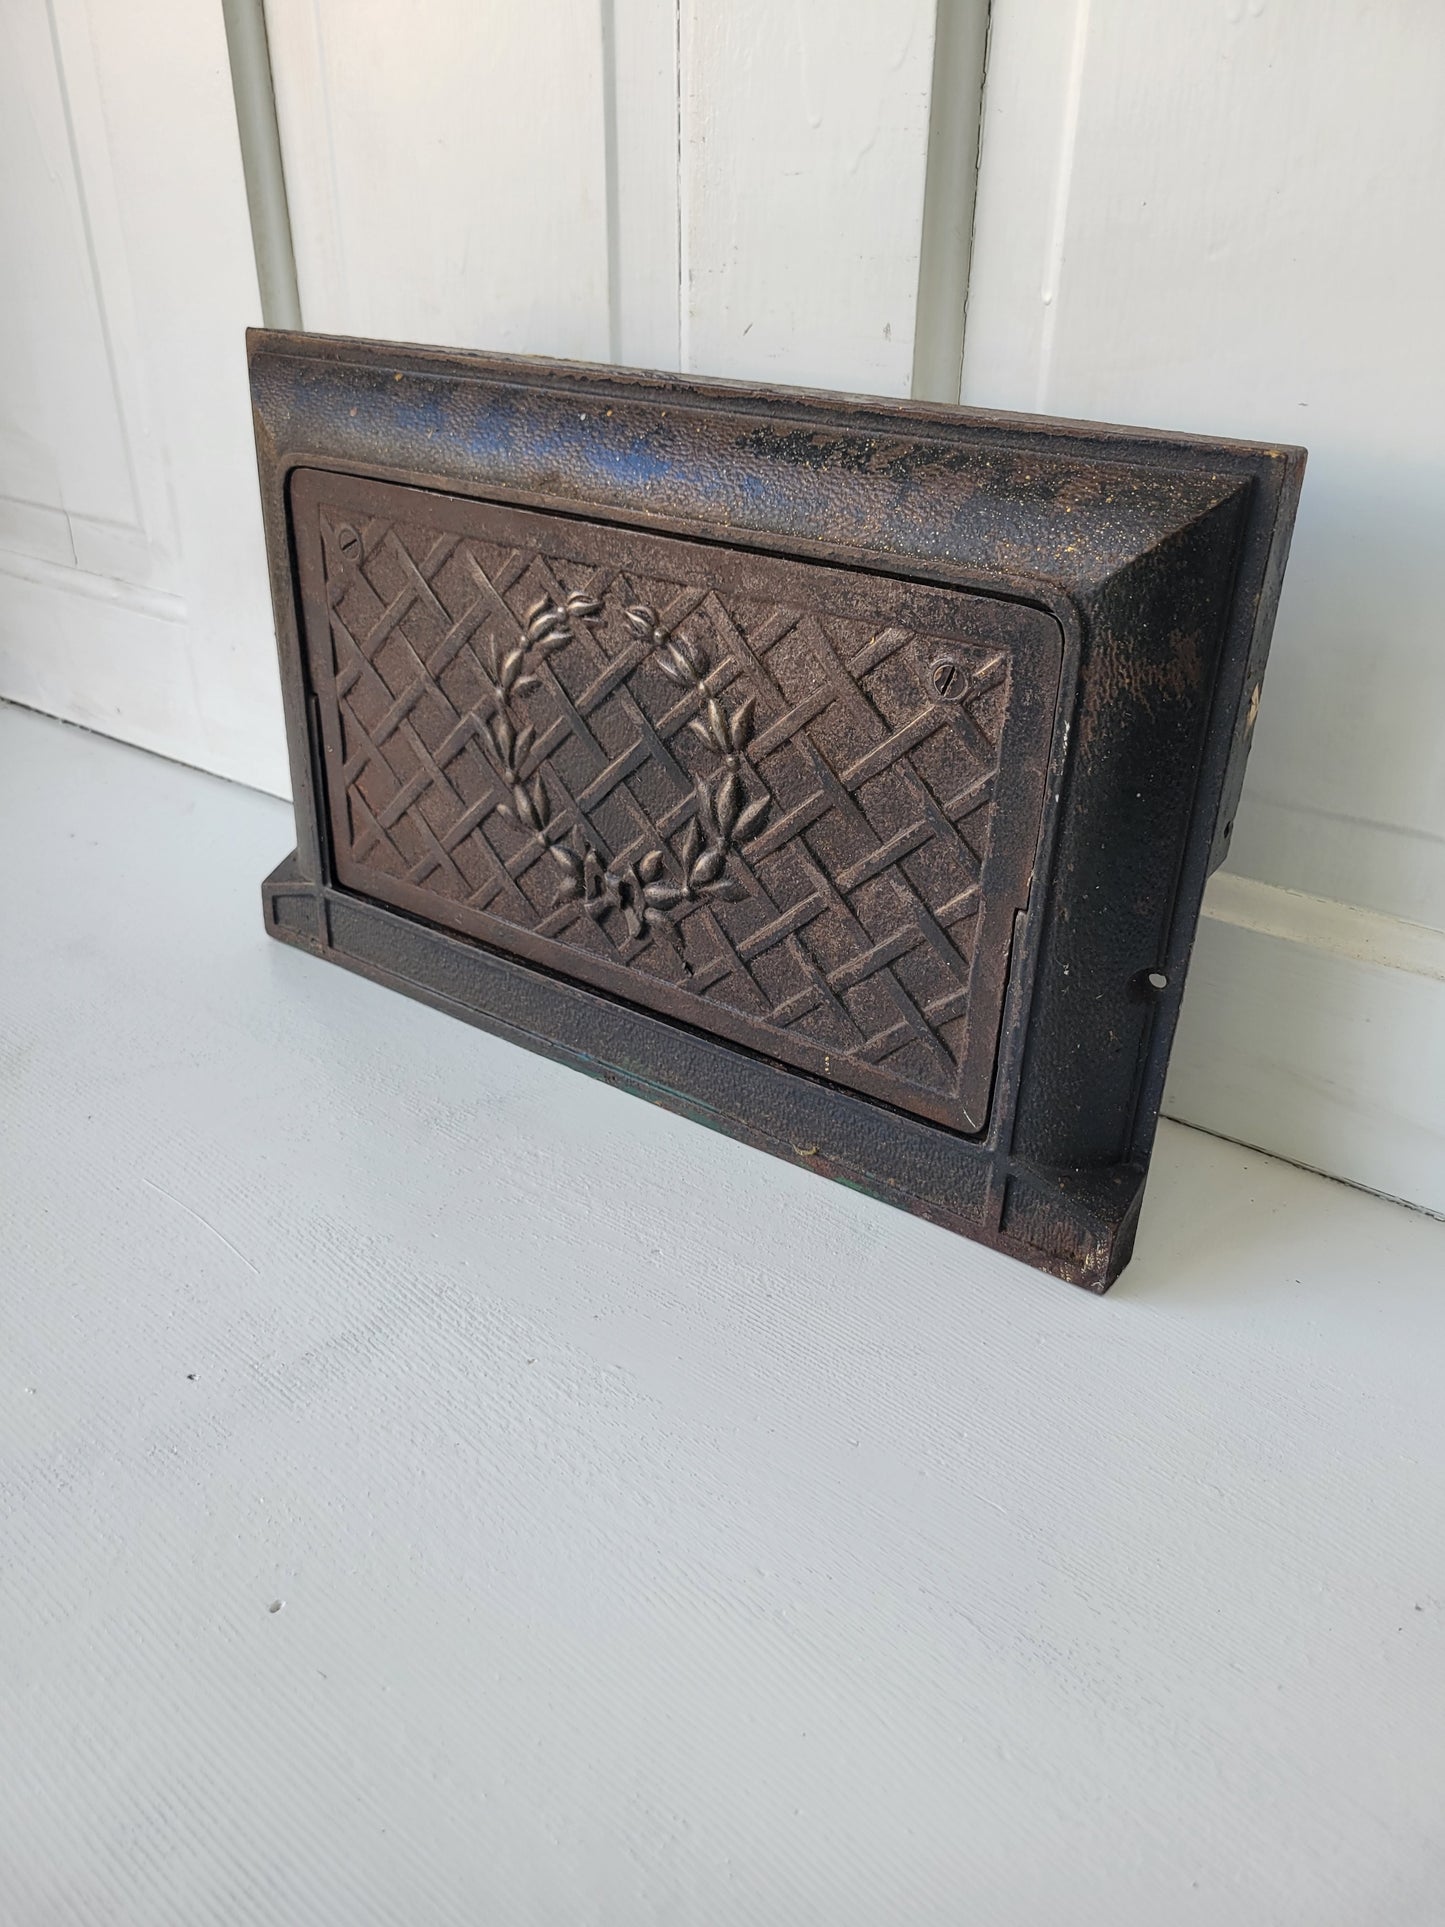 10 x 16 Fancy Cast Iron Fold Out Vent Cover, Antique Floor Register Cover with Dampers #080105